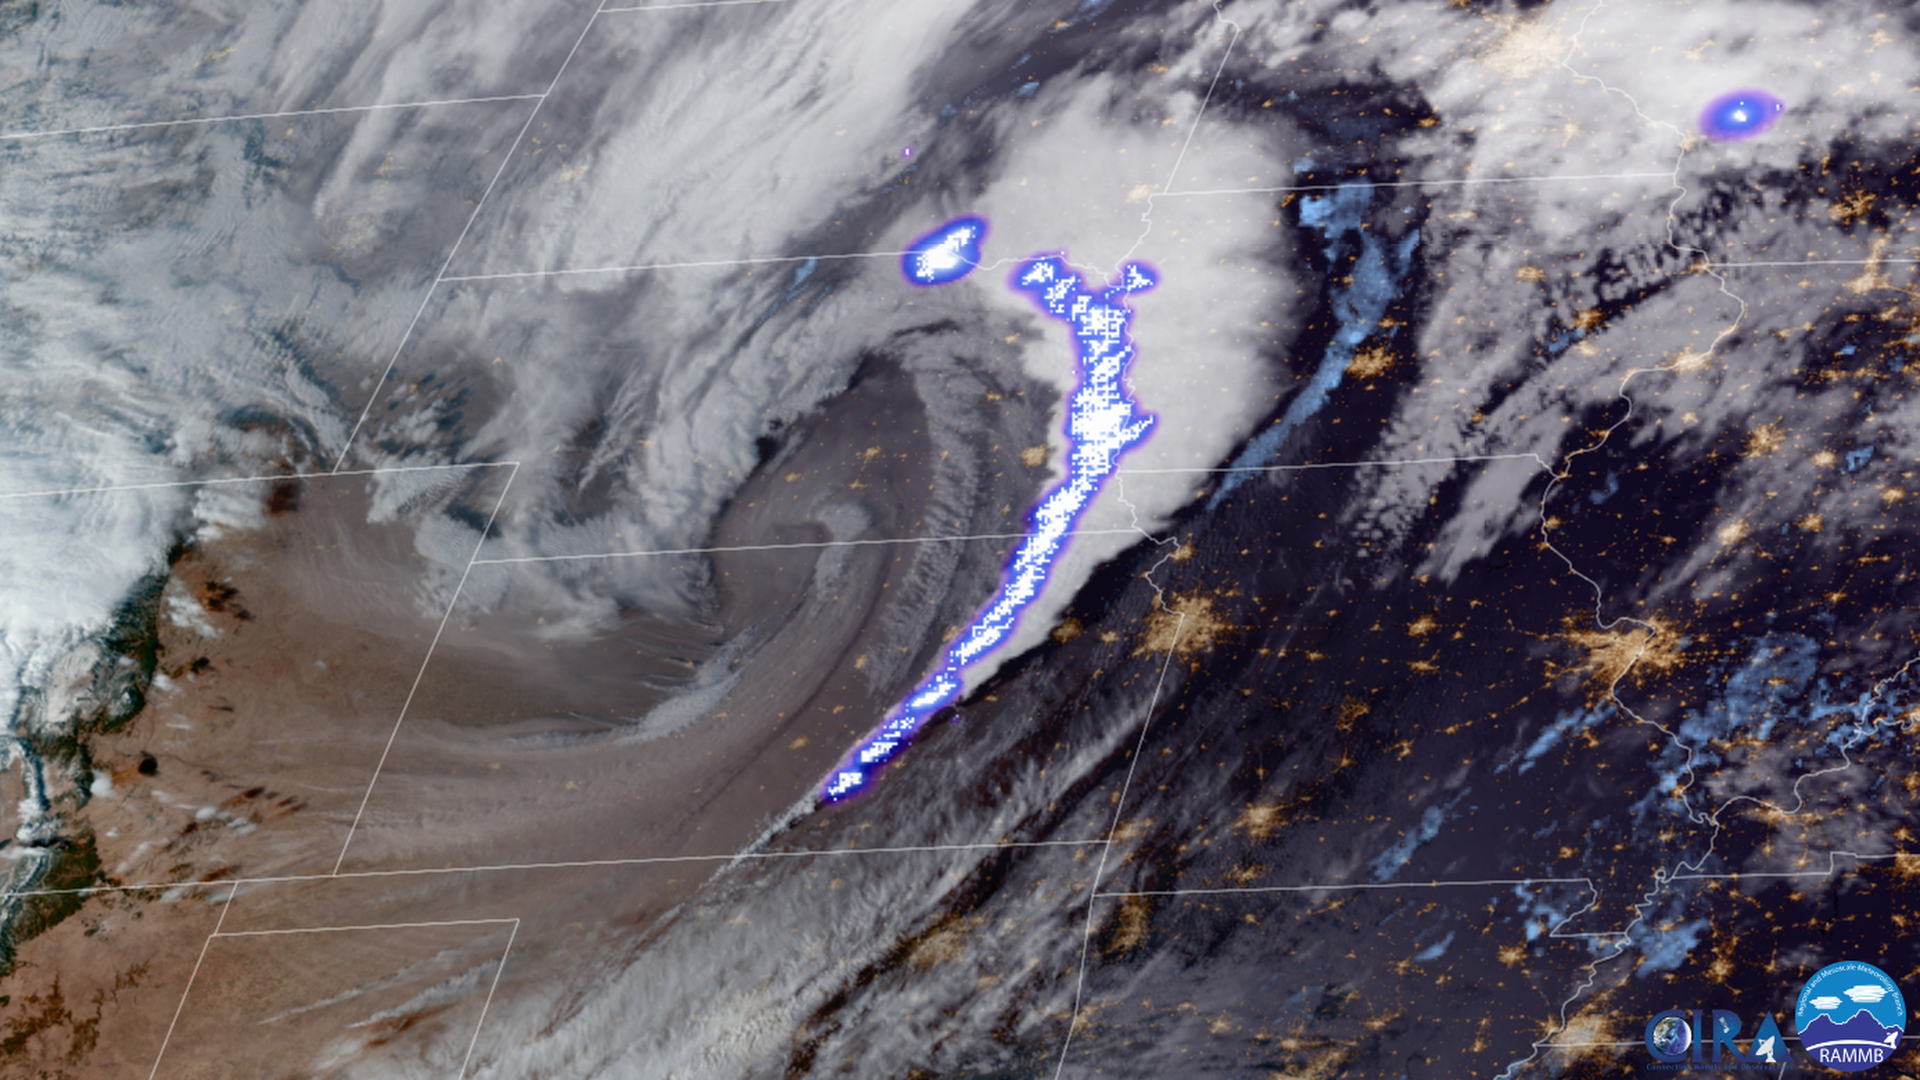 Satellite image showing smoke plumes from wildfires, blowing dust, and thunderstorms with lightning flashes detected across the Plains on Dec. 15. (CIRA/RAMMB)